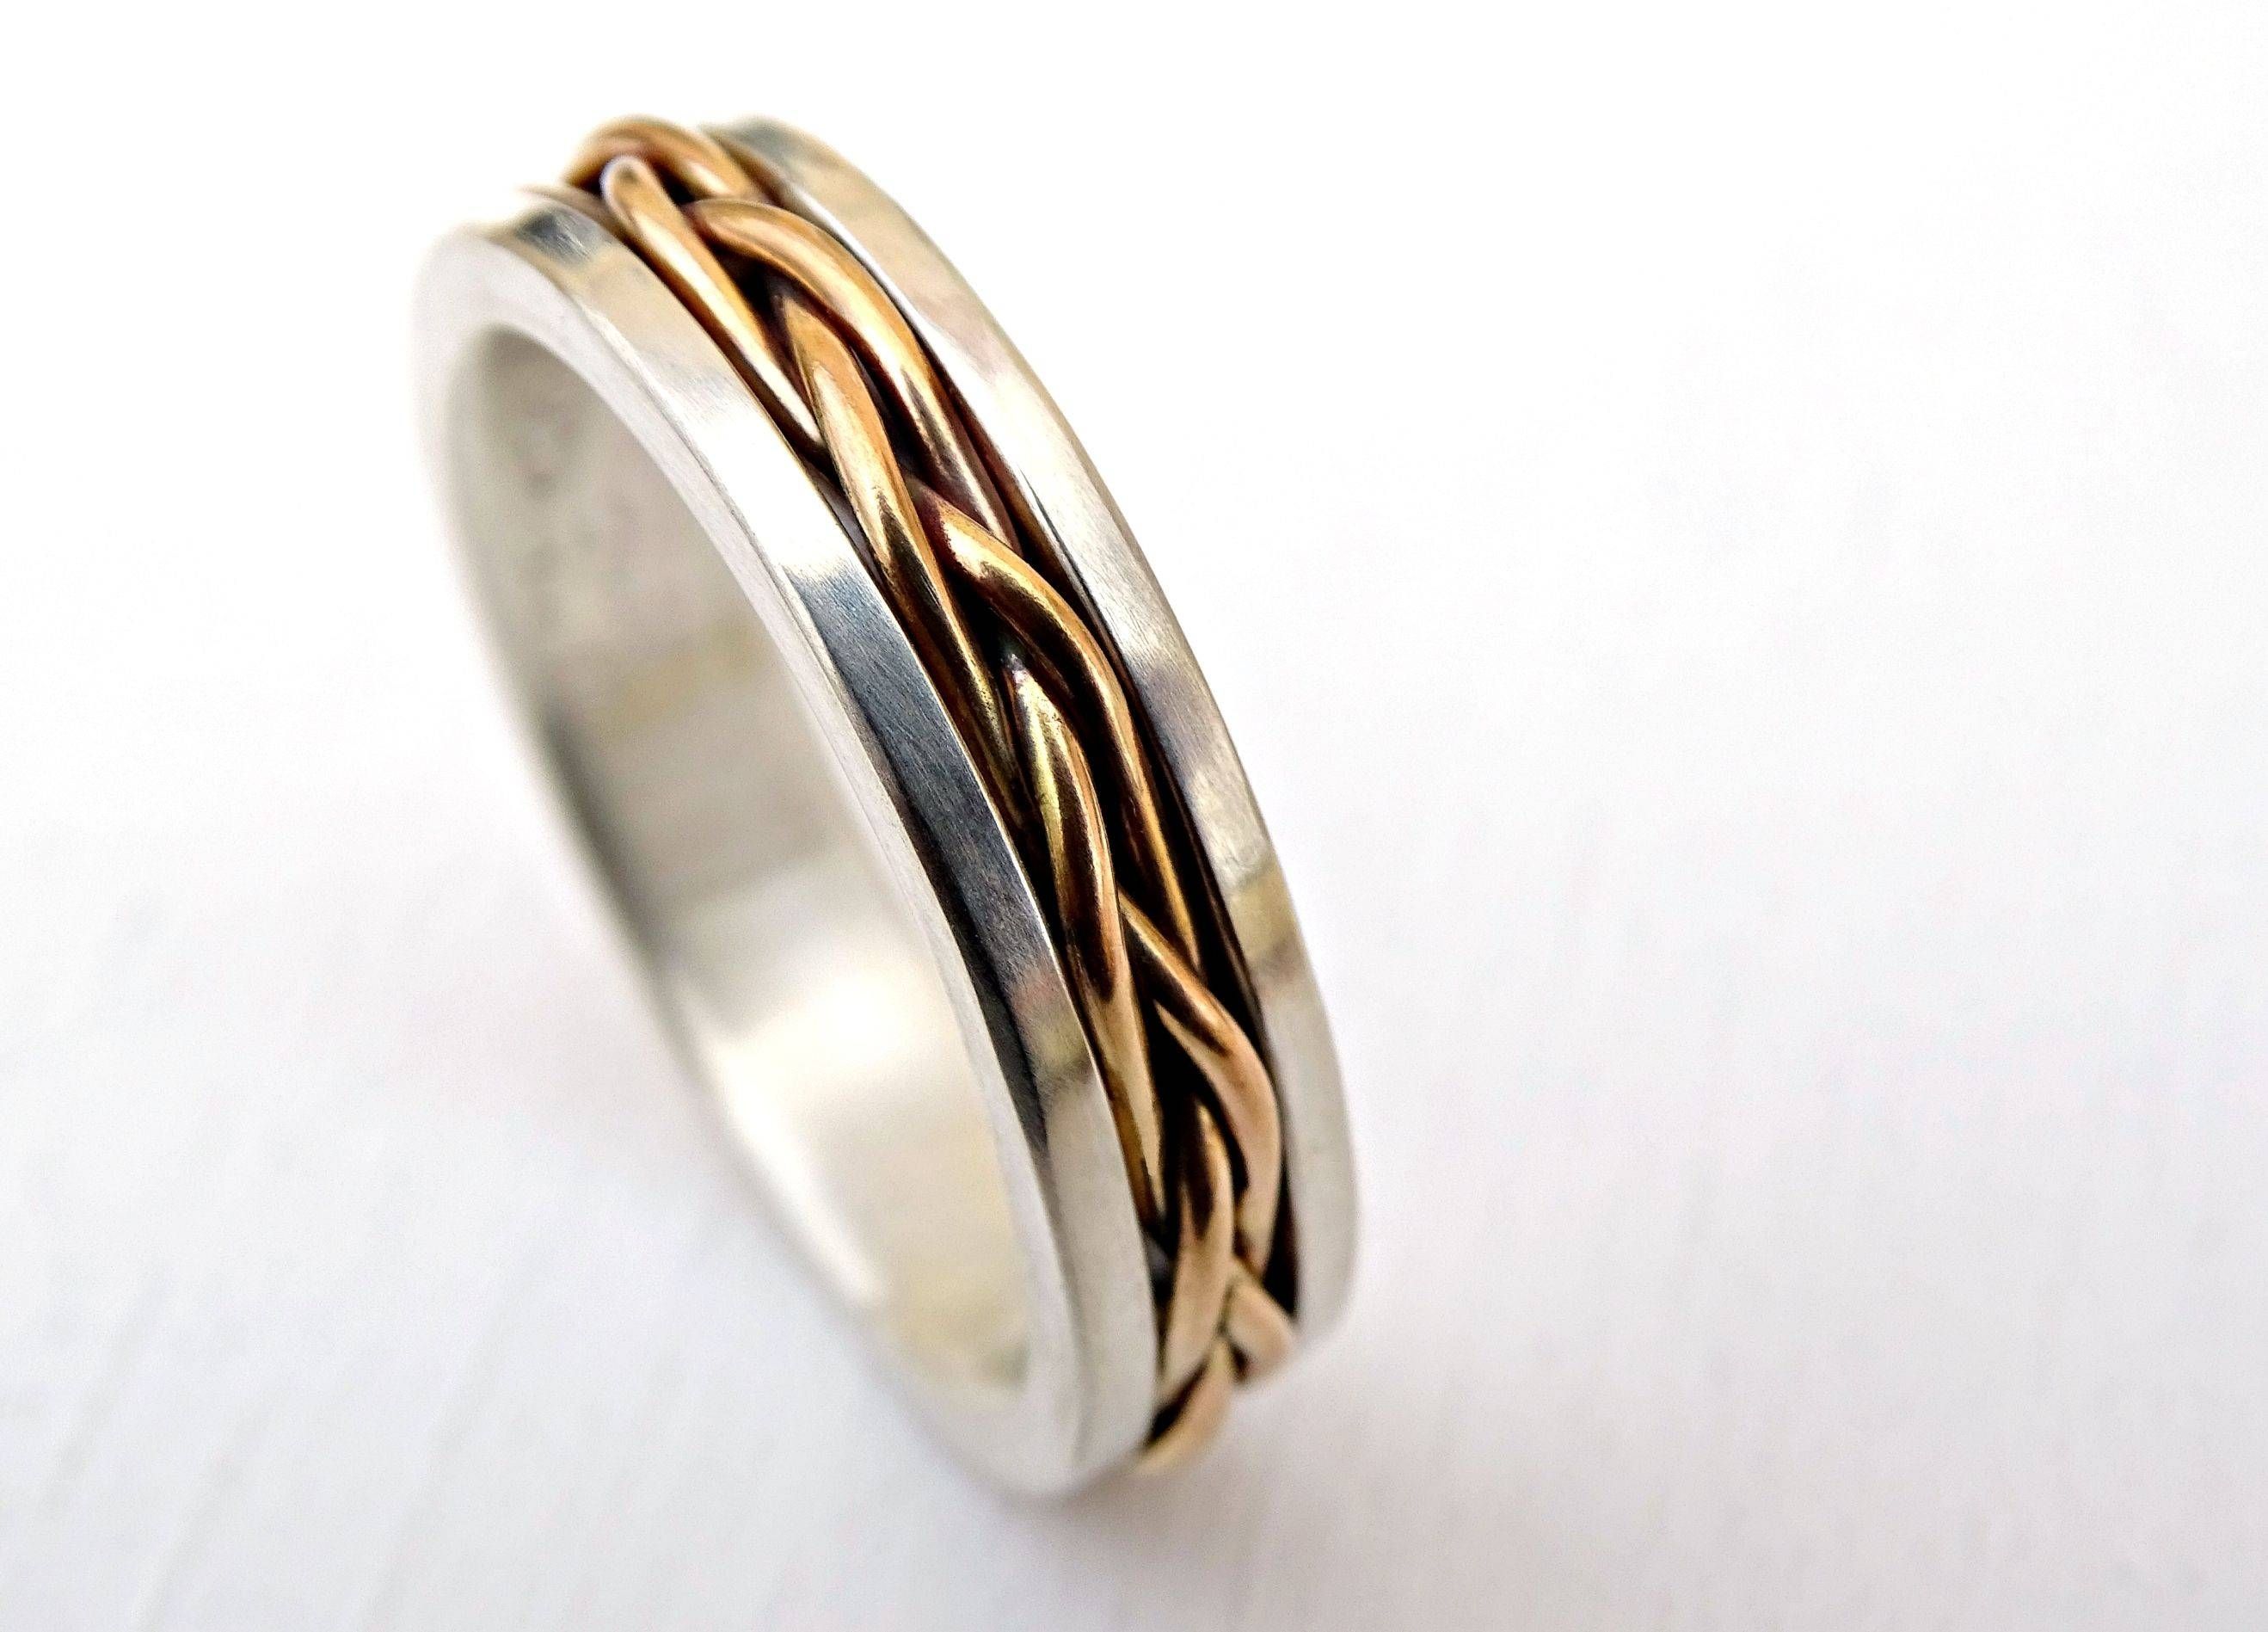 Buy A Custom Made Celtic Wedding Band Men, Gold Braided Wedding Inside Celtic Wedding Bands For Him (View 12 of 15)